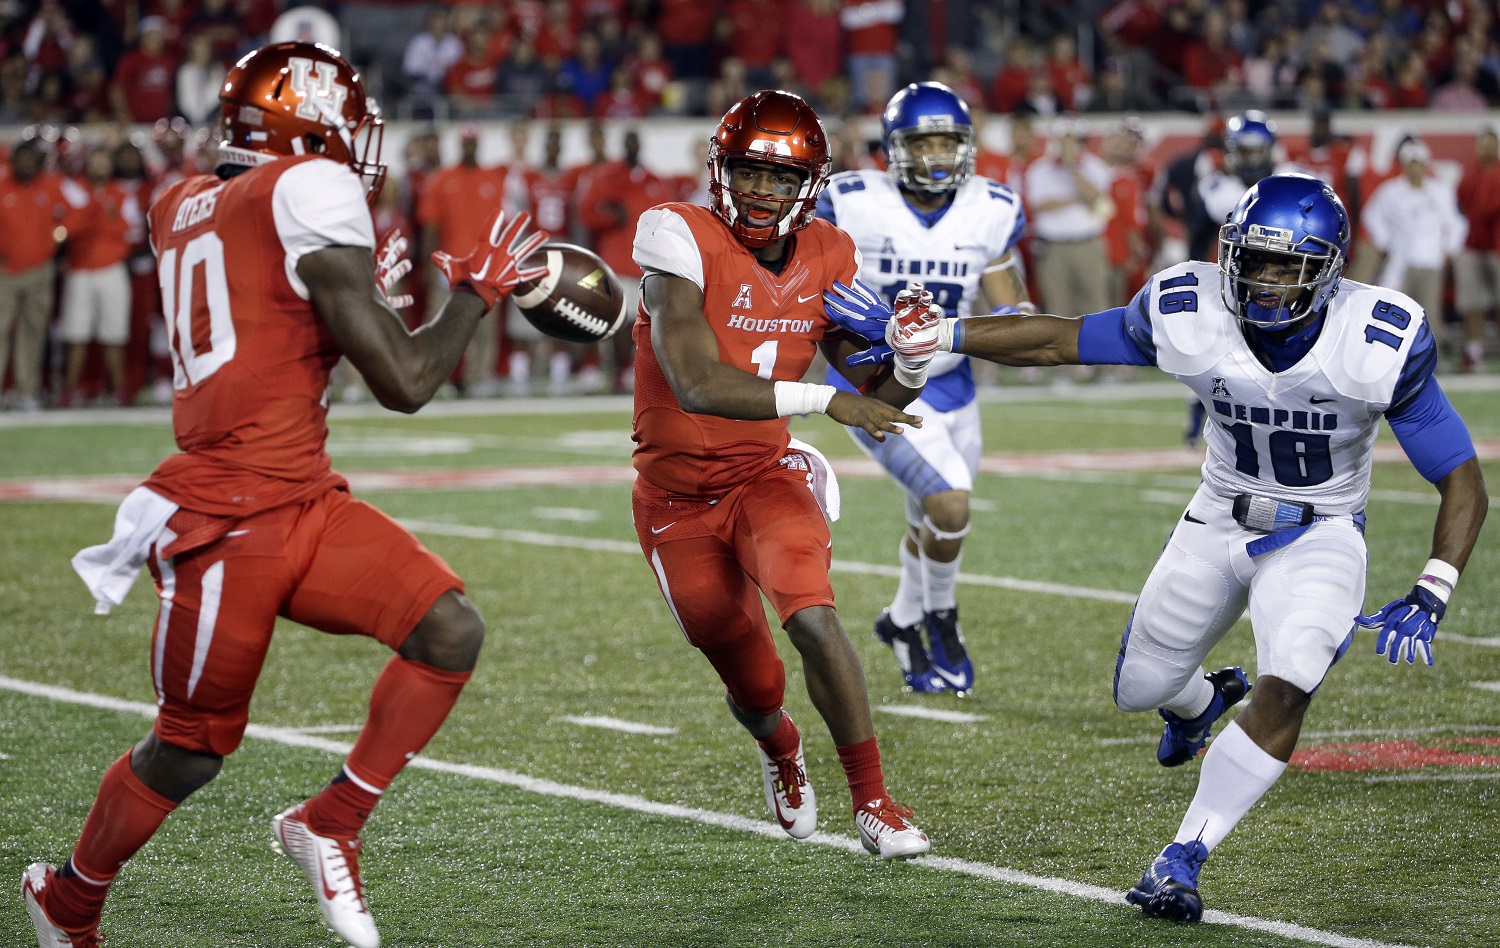 Houston quarterback Greg Ward Jr. (1) pitches the ball to wide receiver Demarcus Ayers (10) as Memphis linebacker Wynton McManis (16) defends during the first quarter of an NCAA college football game Saturday, Nov. 14, 2015, in Houston. (AP Photo/David J. Phillip)